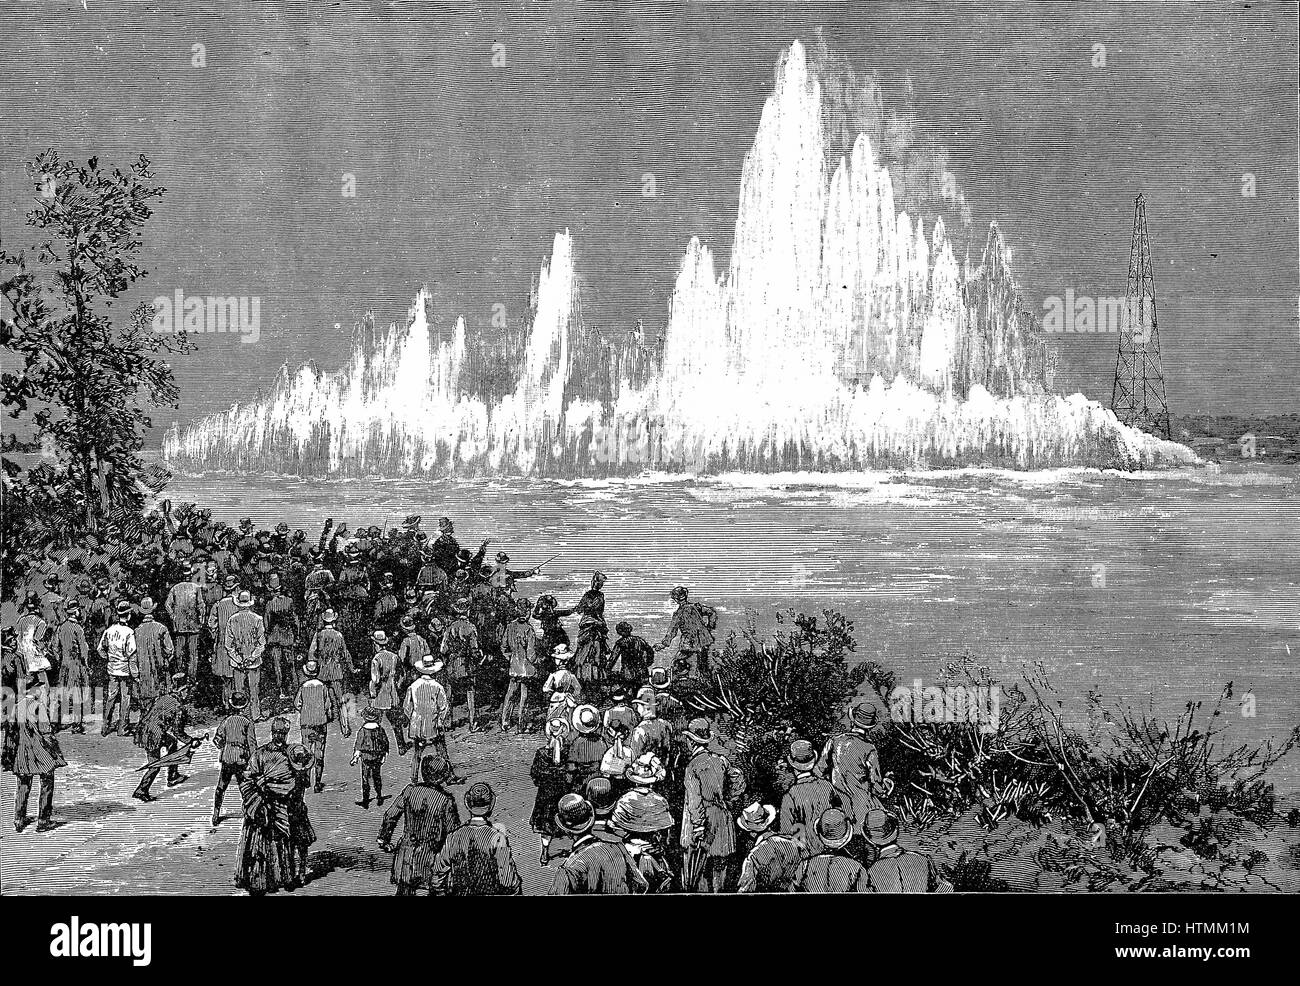 Blowing up Flood Rock, part of the Hell Gate Rocks complex which prevented large vessels reaching New York Harbour, and presented a hazard to smaller ones. Dynamite was the explosive used. From "The Illustrated London News", October 1885. Wood engraving. Stock Photo